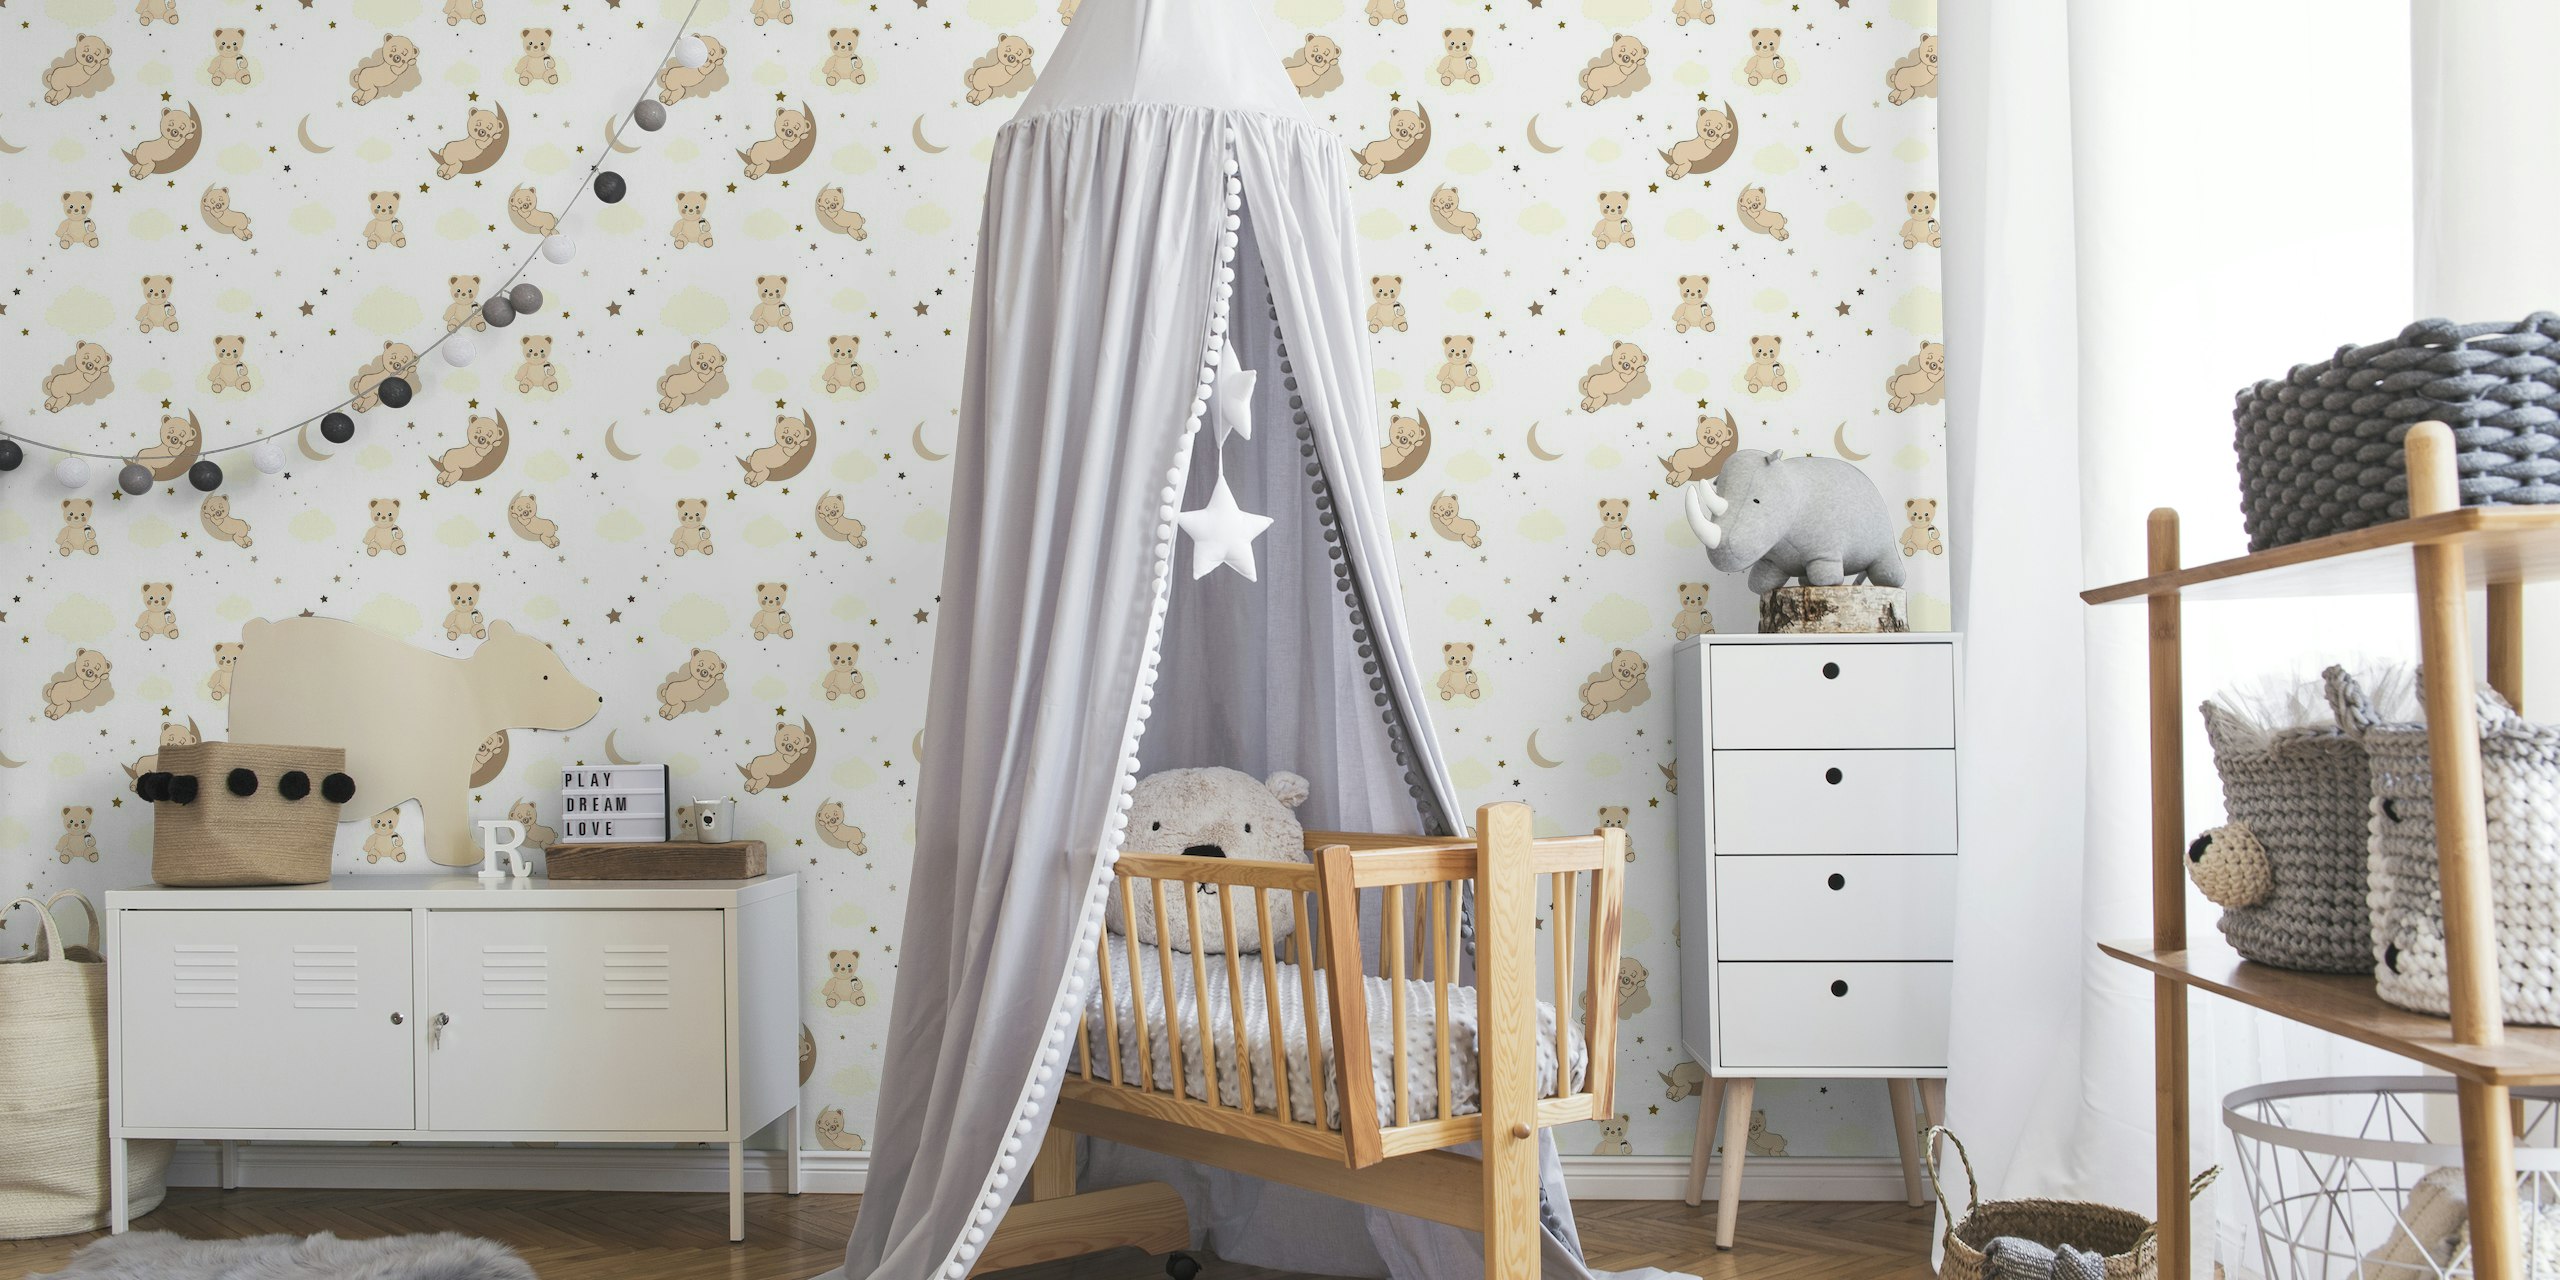 Cute teddy bear pattern with playful teddy illustrations and celestial elements on a wallpaper mural